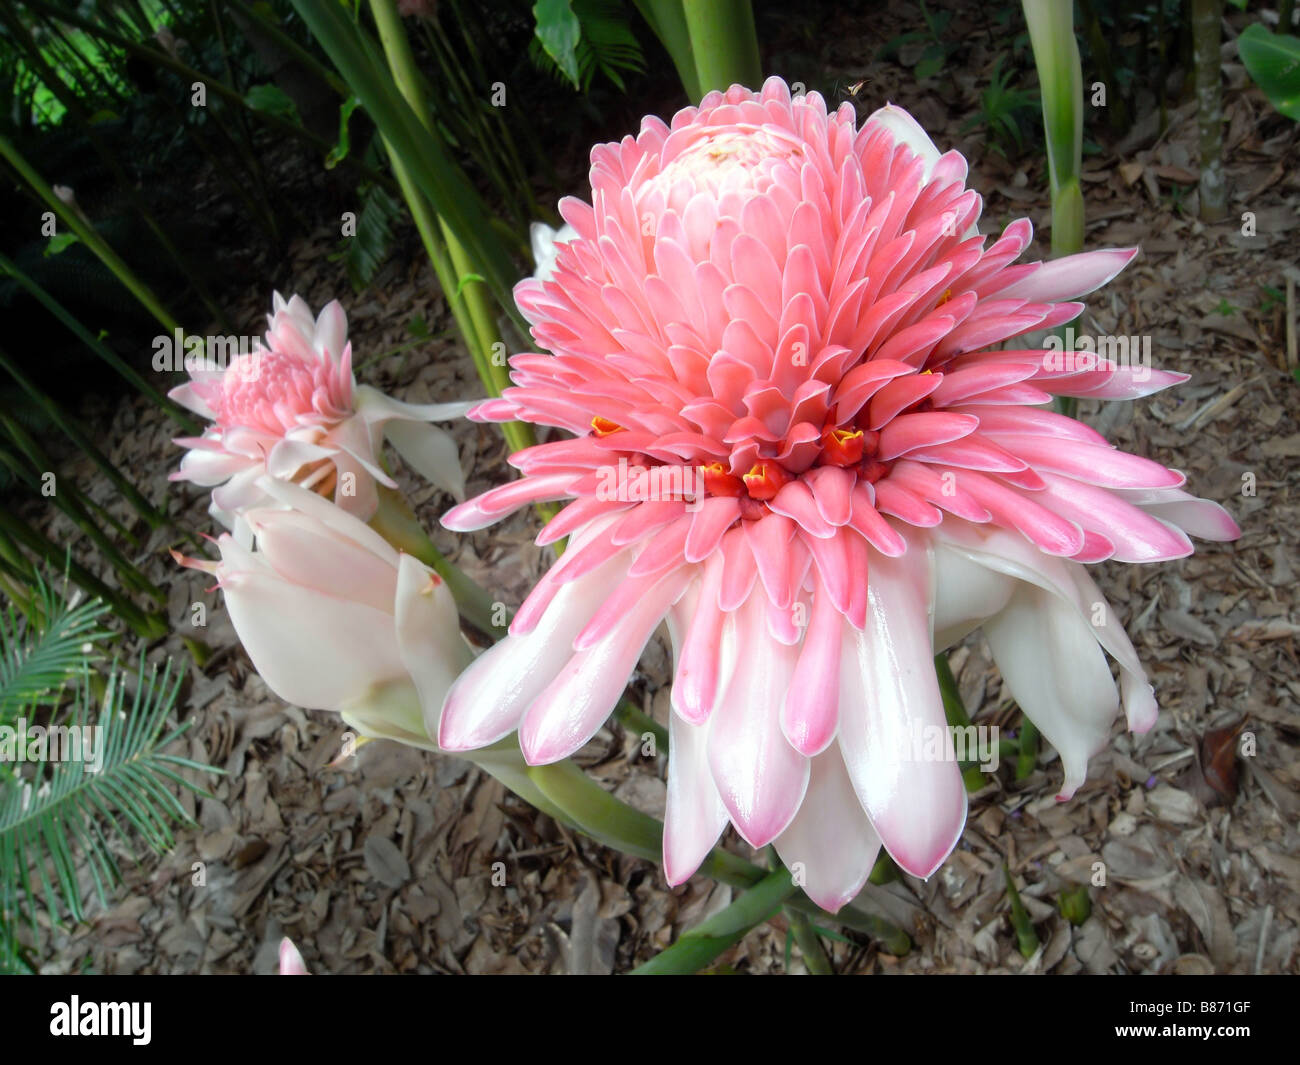 Spectacular flowers of the pink torch ginger Etlingera elatior var pink native to rainforests of Indonesia and New Guinea Stock Photo